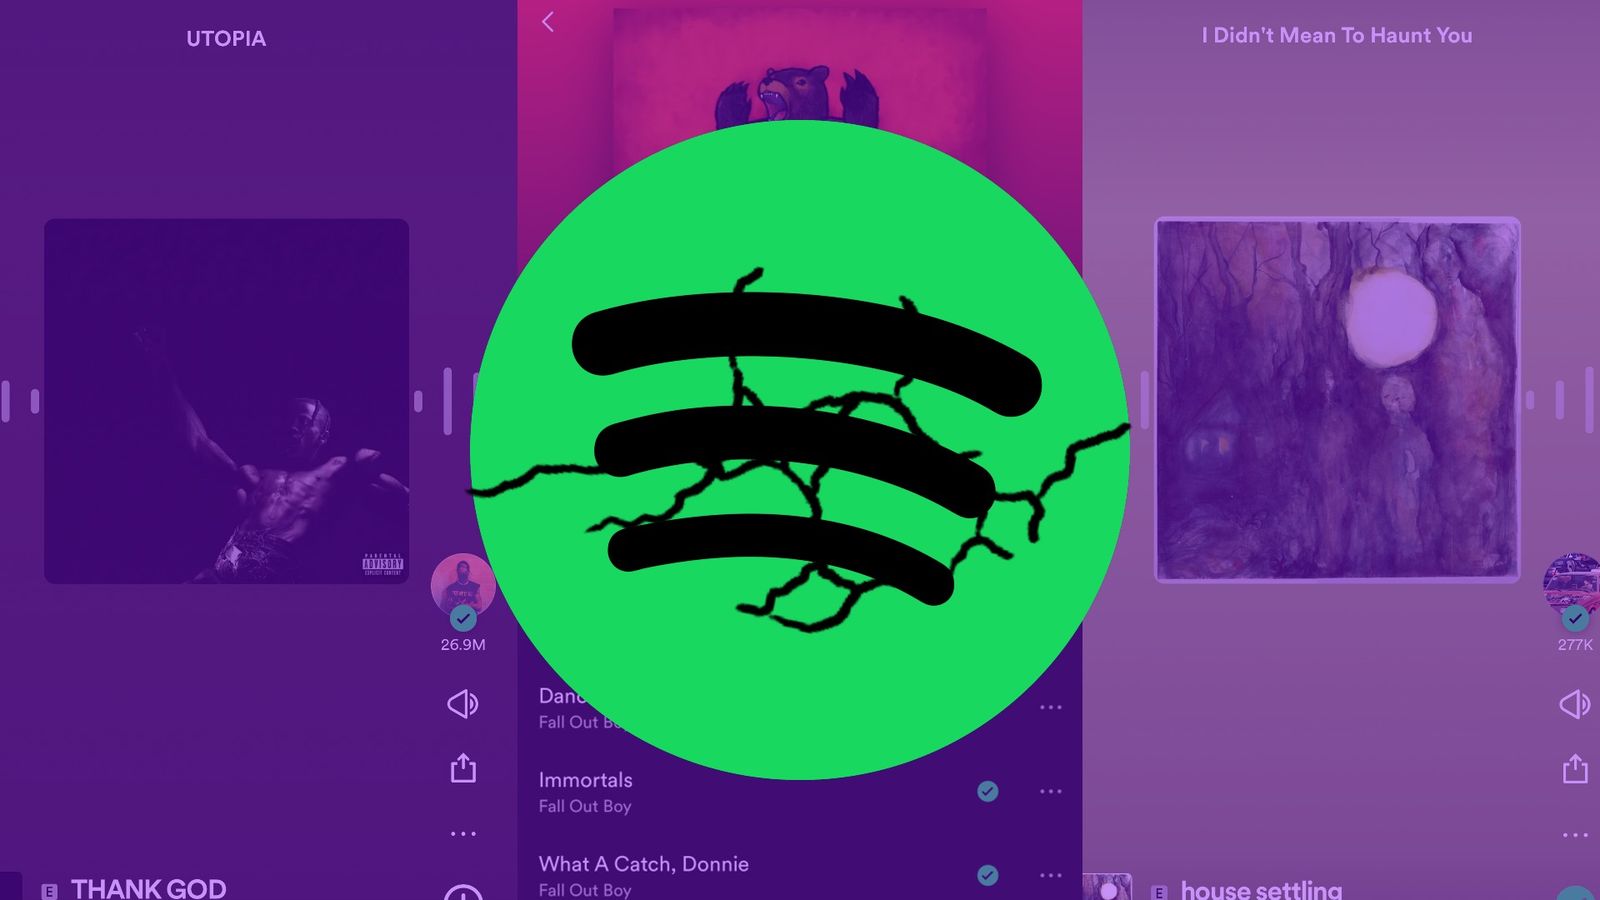 Spotify logo in front of a purple transparent block with Spotify screenshots behind it